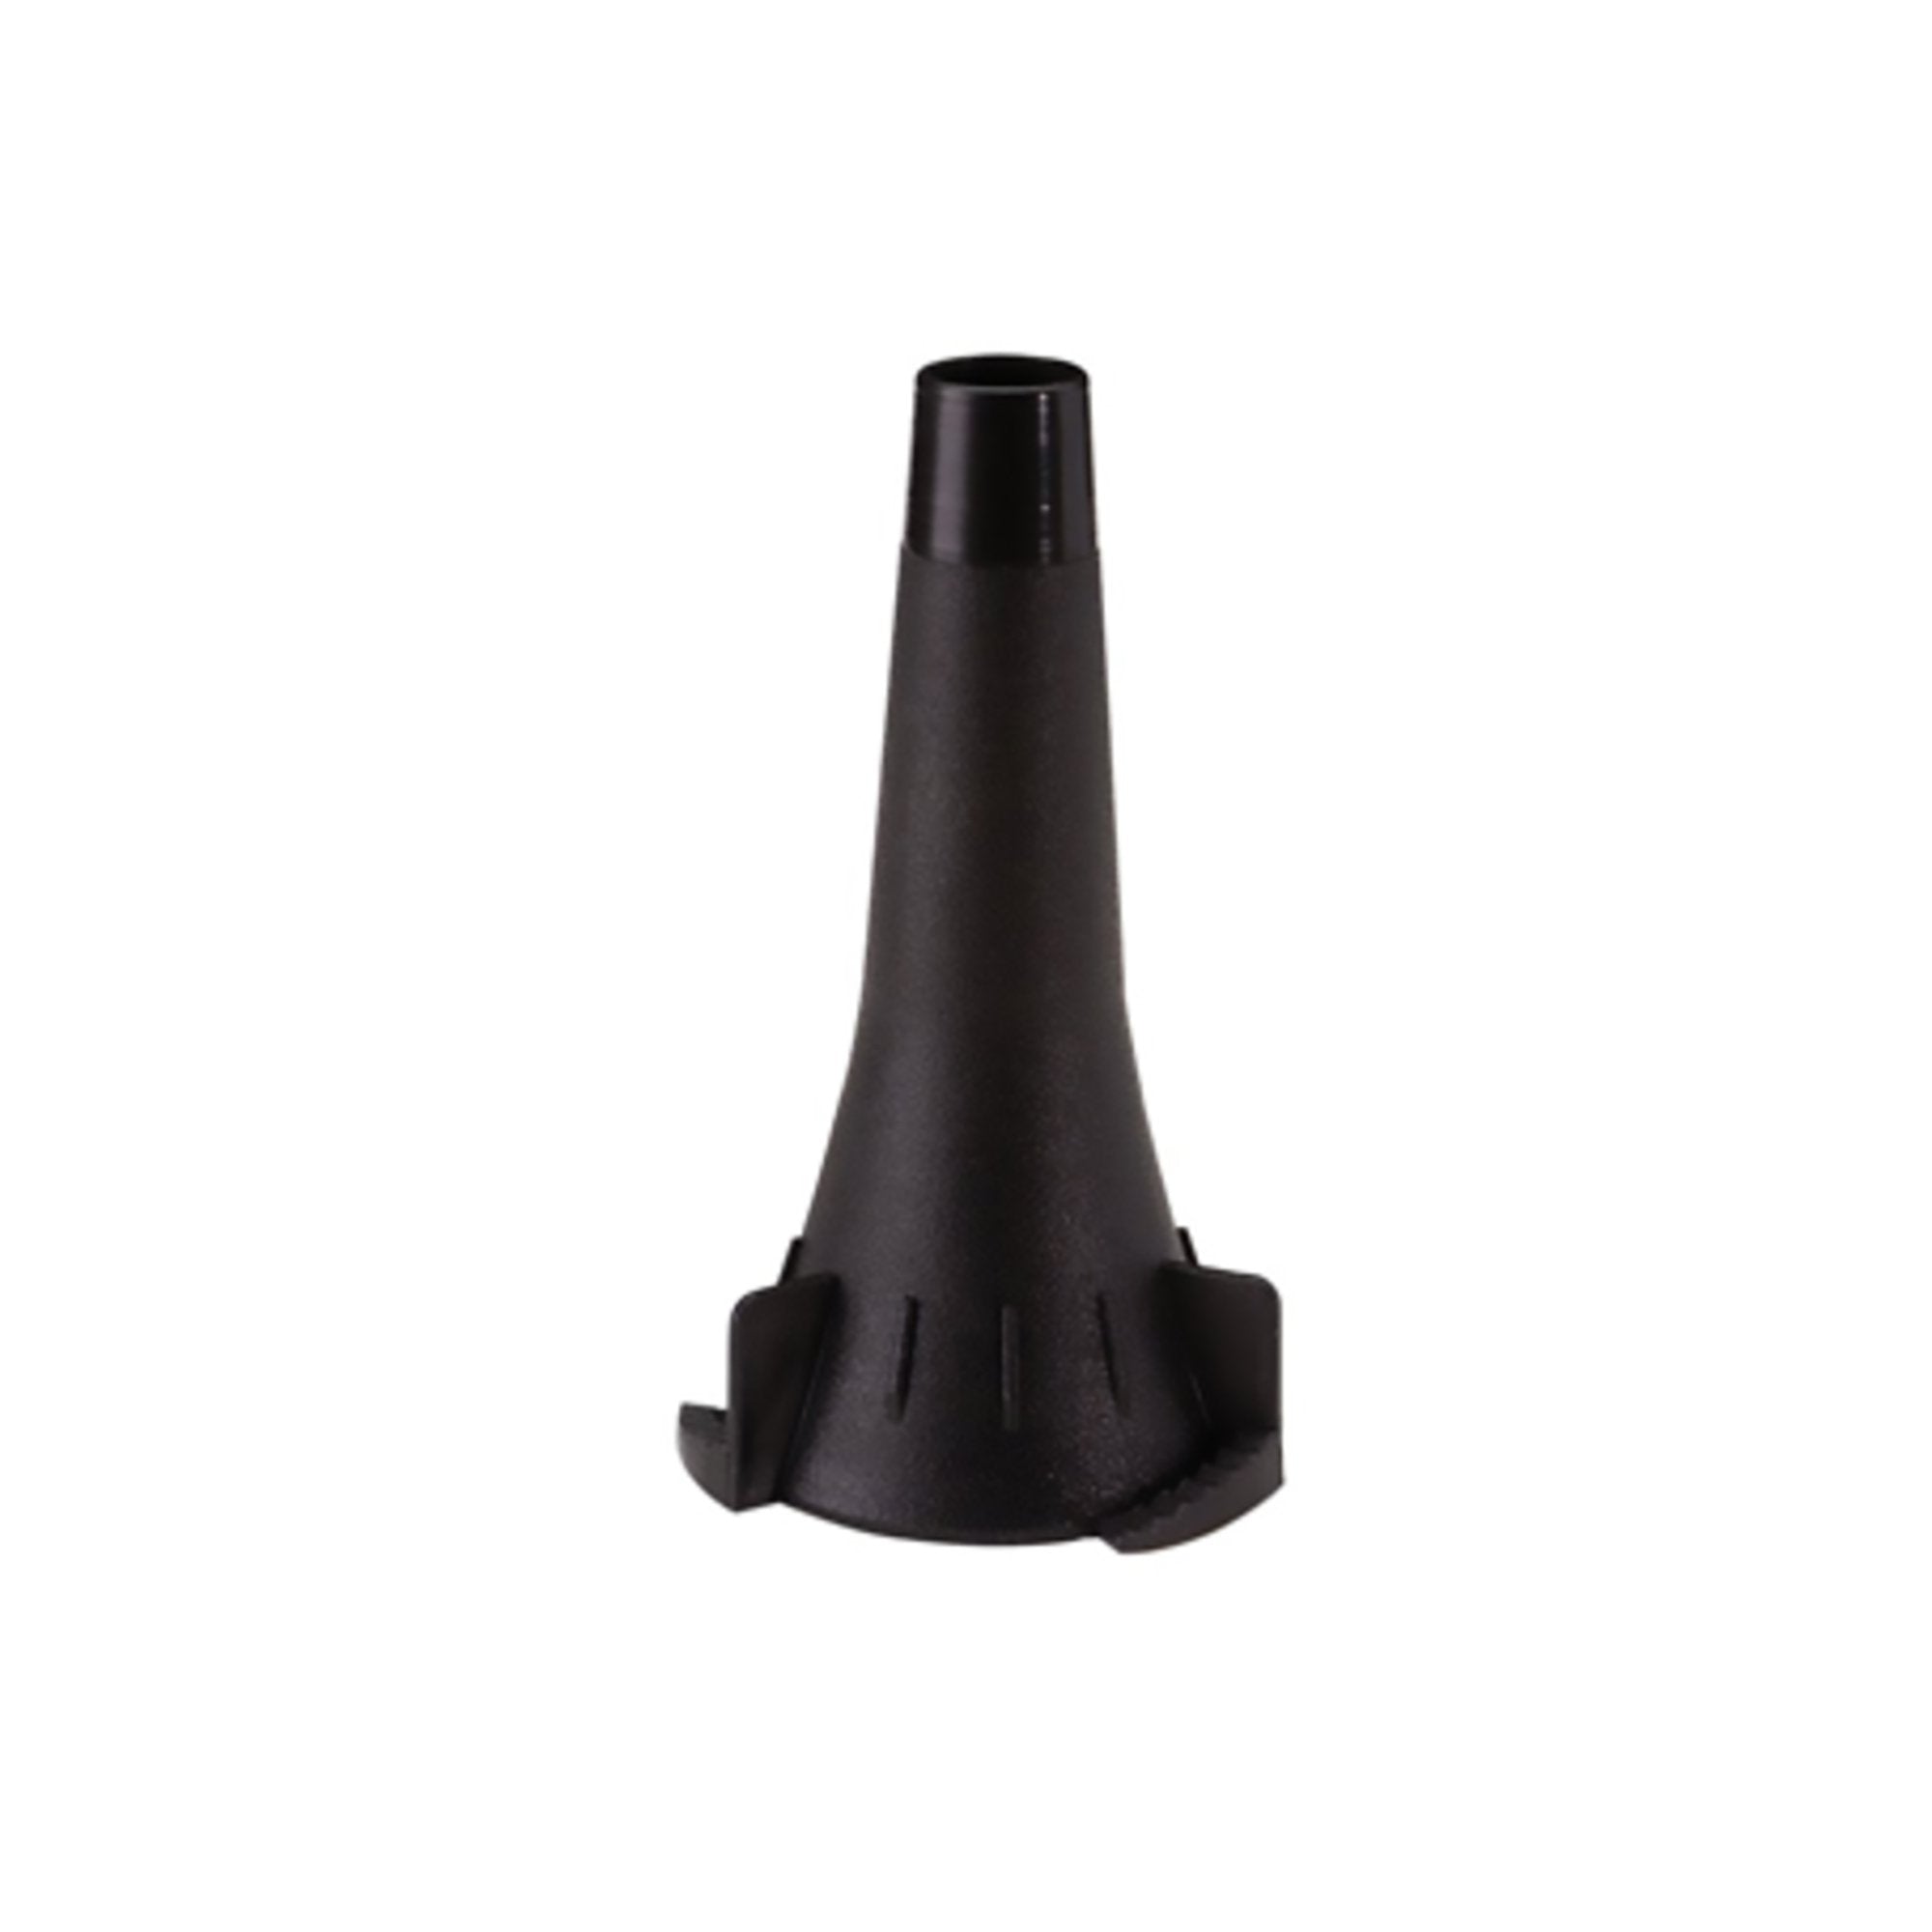 WELCH ALLYN KLEENSPEC? DISPOSABLE OTOSCOPE SPECULA, 2.75 mm